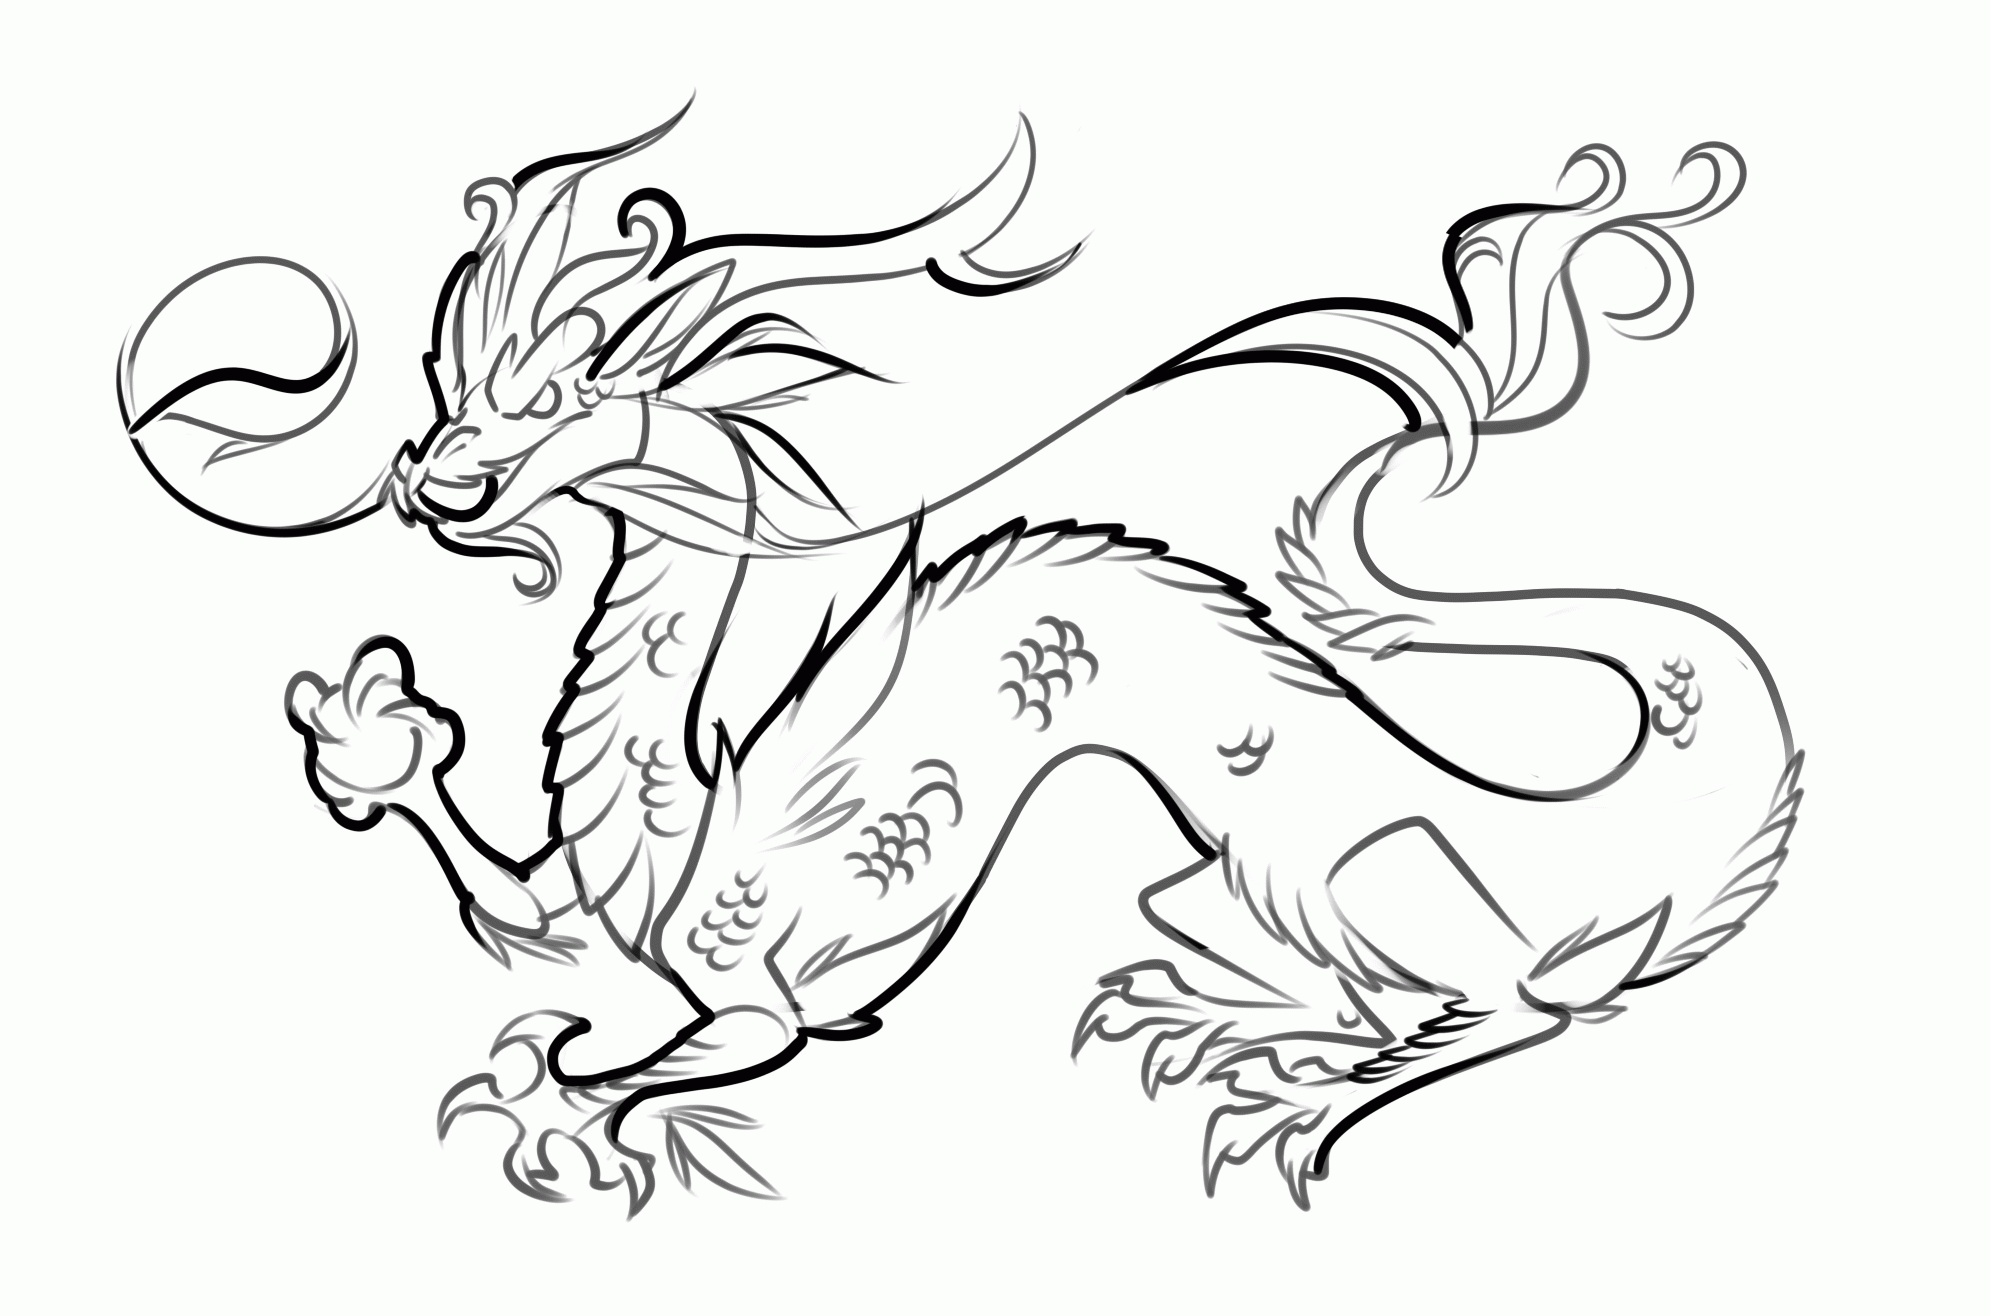 Chinese Dragon Coloring Page Coloring Pages For Kids And For Adults Coloring Home